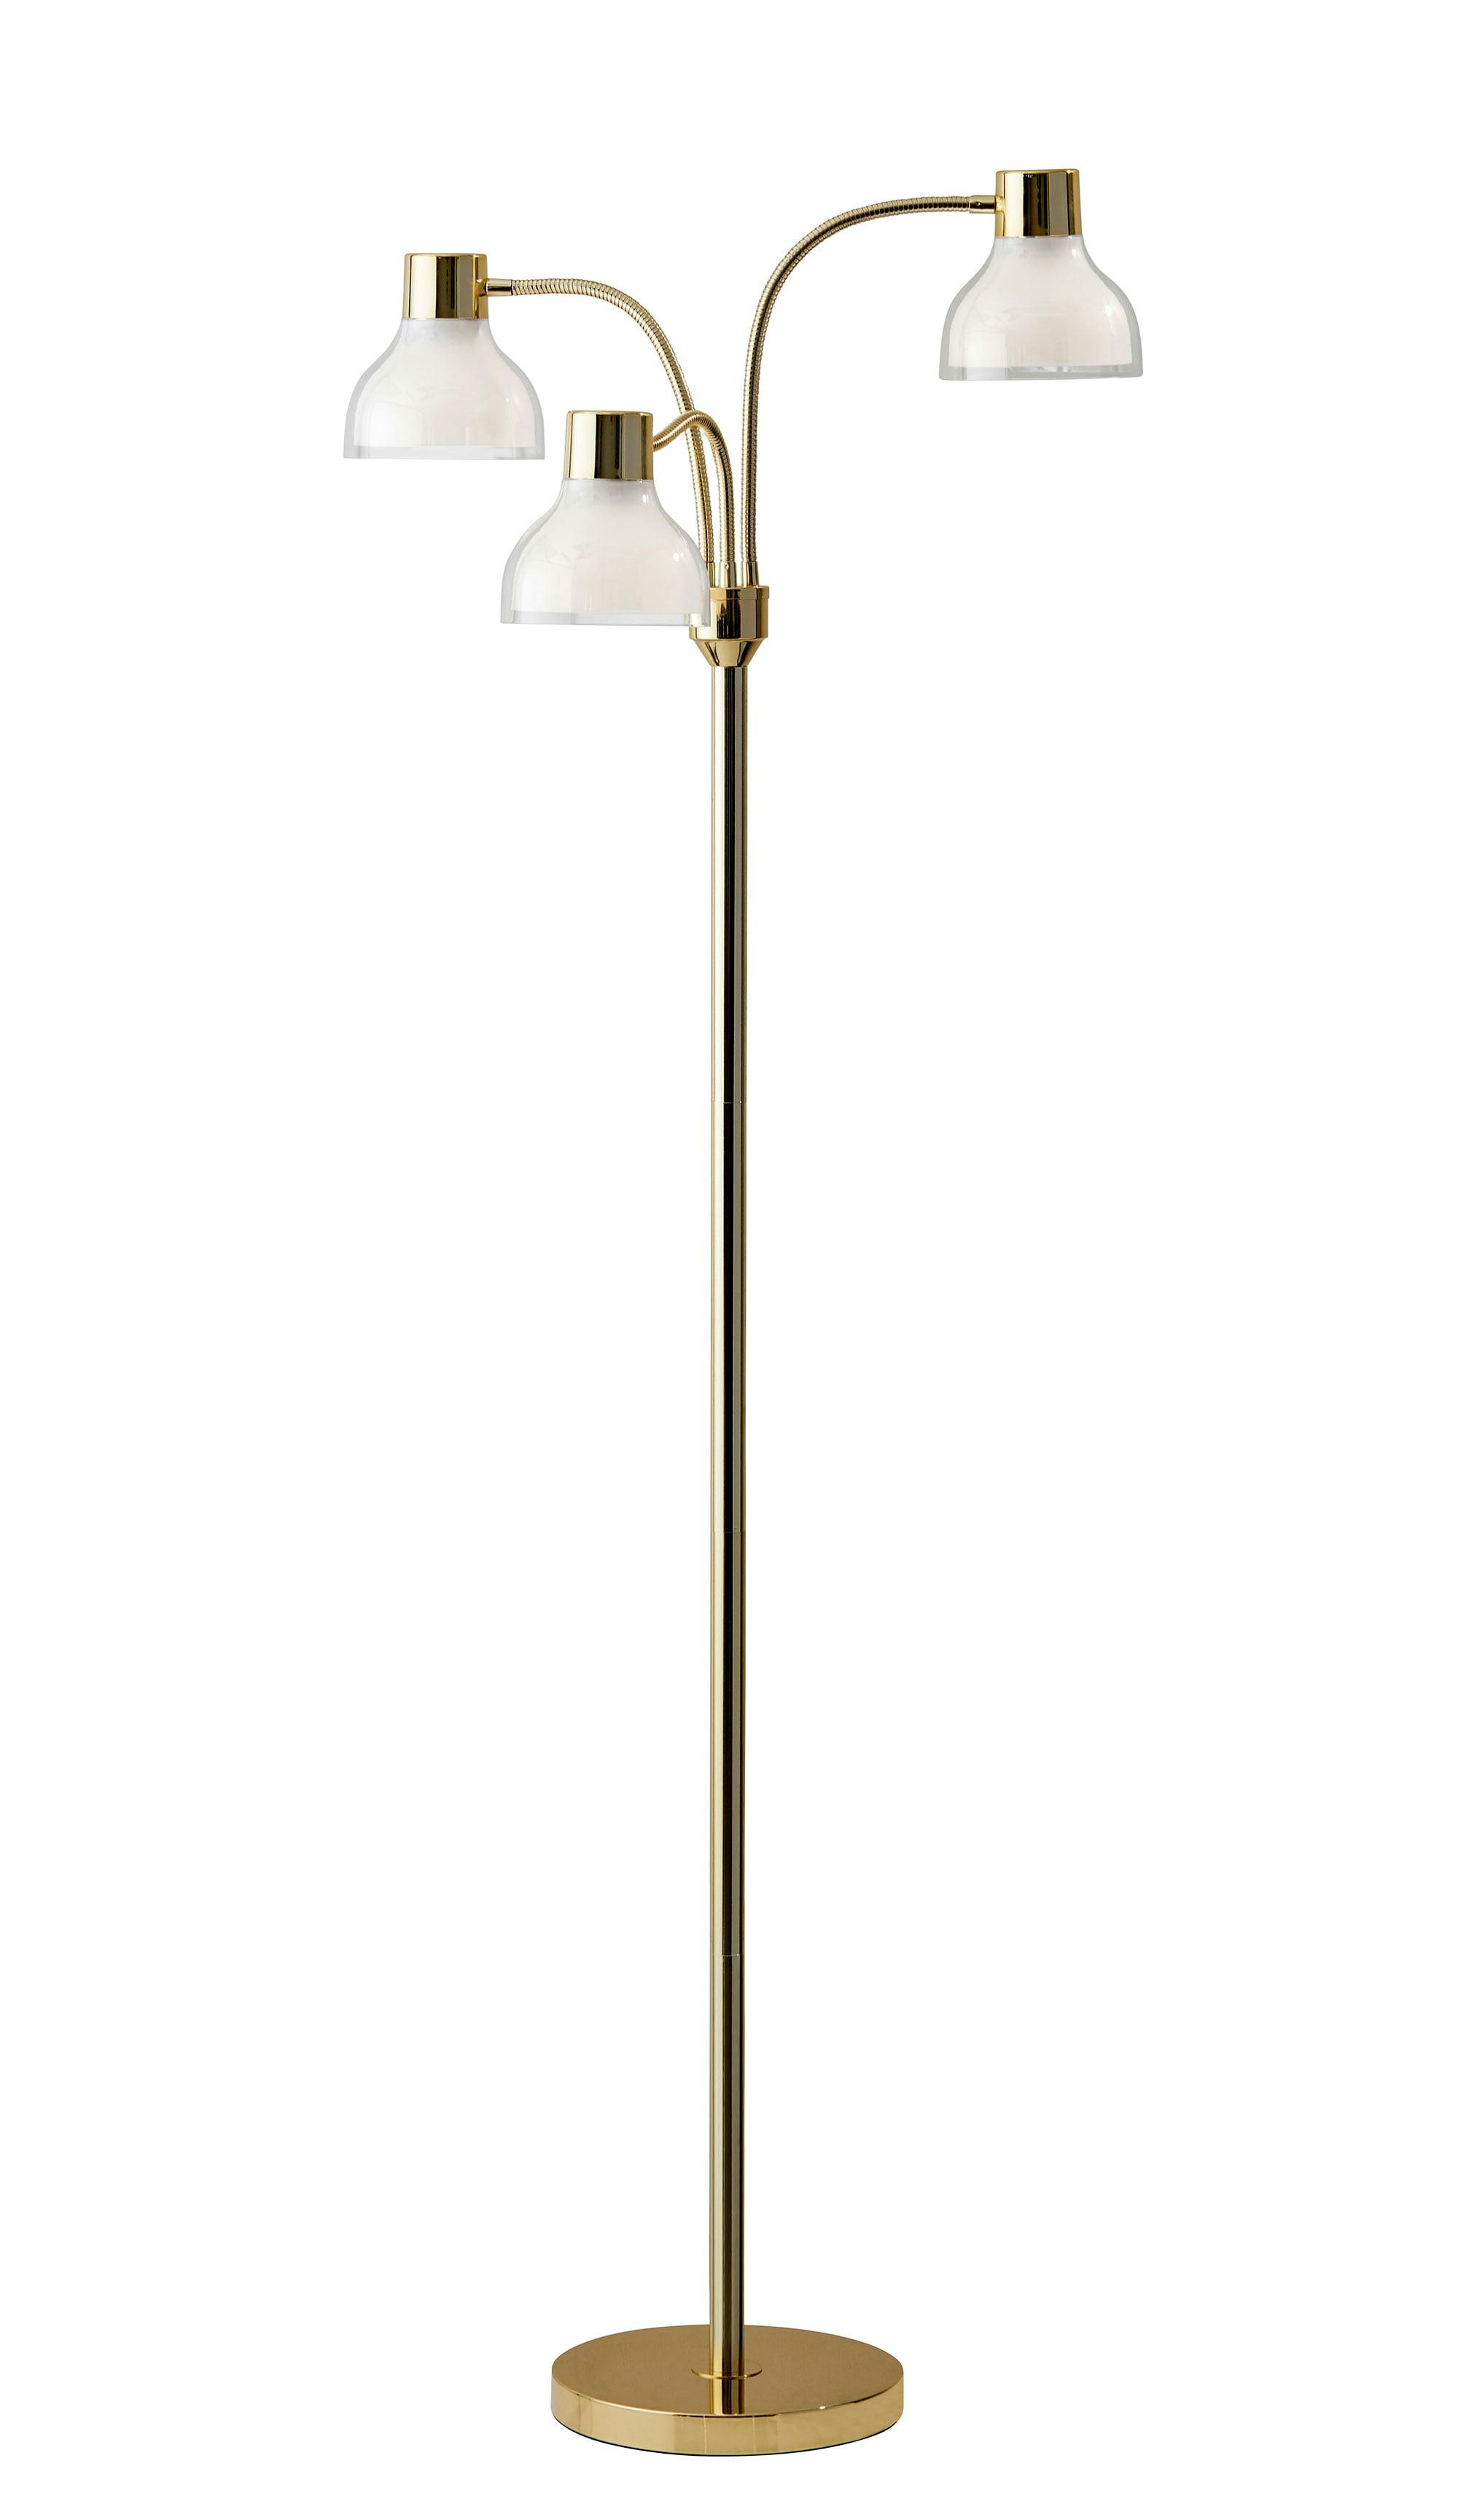 Presley Adjustable 3-Arm Arc Floor Lamp in Shiny Gold with Frosted Shade